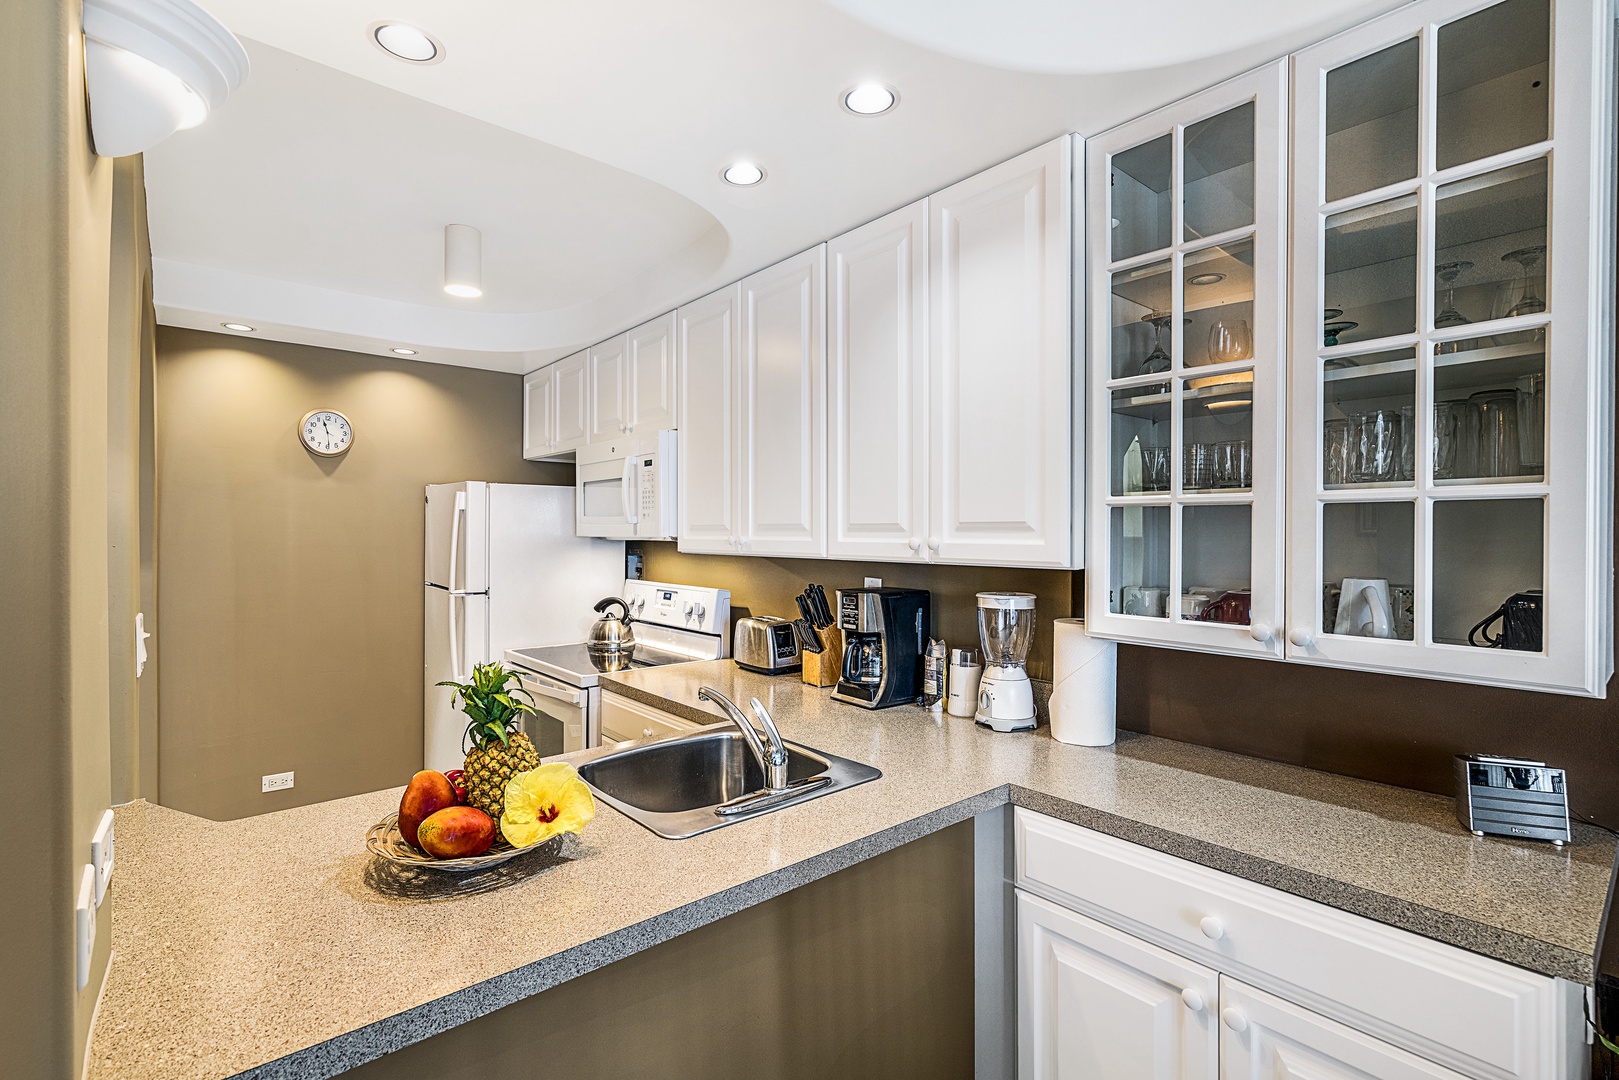 Kailua Kona Vacation Rentals, Kona Alii 304 - The kitchen at Kona Alii 304 is outfitted with all large appliances, a variety of small ones, as well as all culinary essentials needed to create a savory gourmet meal